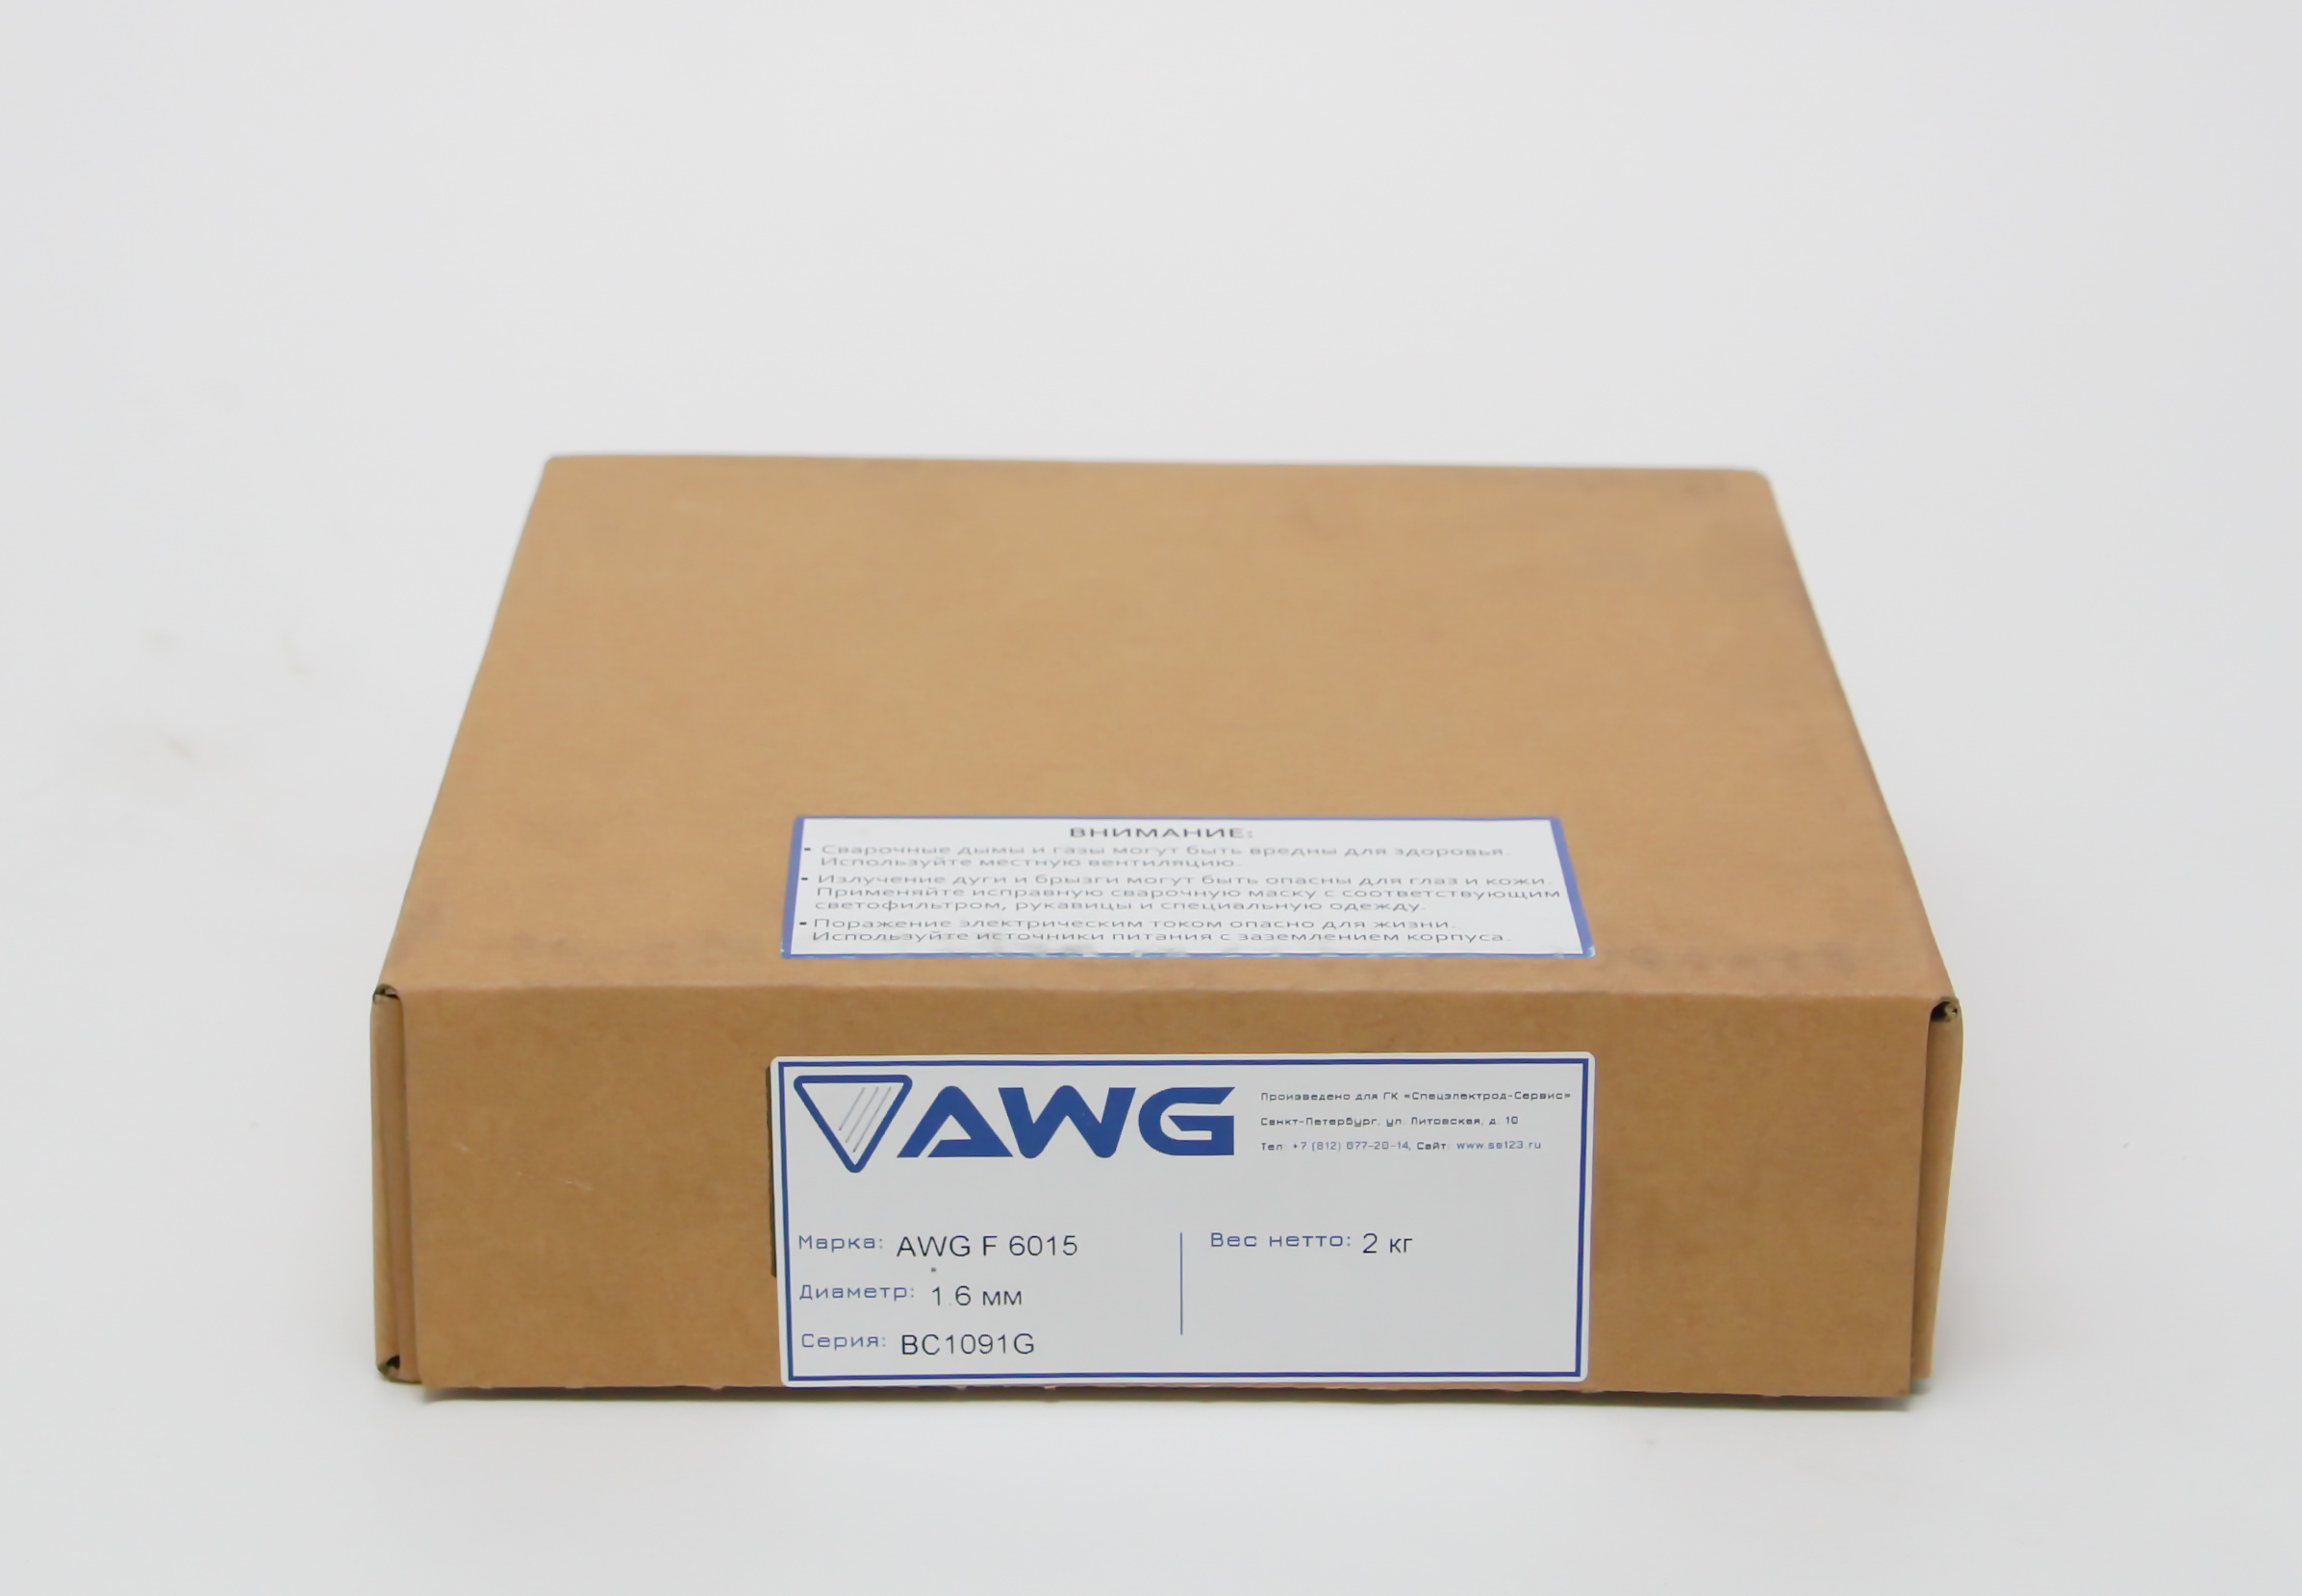 awg-f-6015